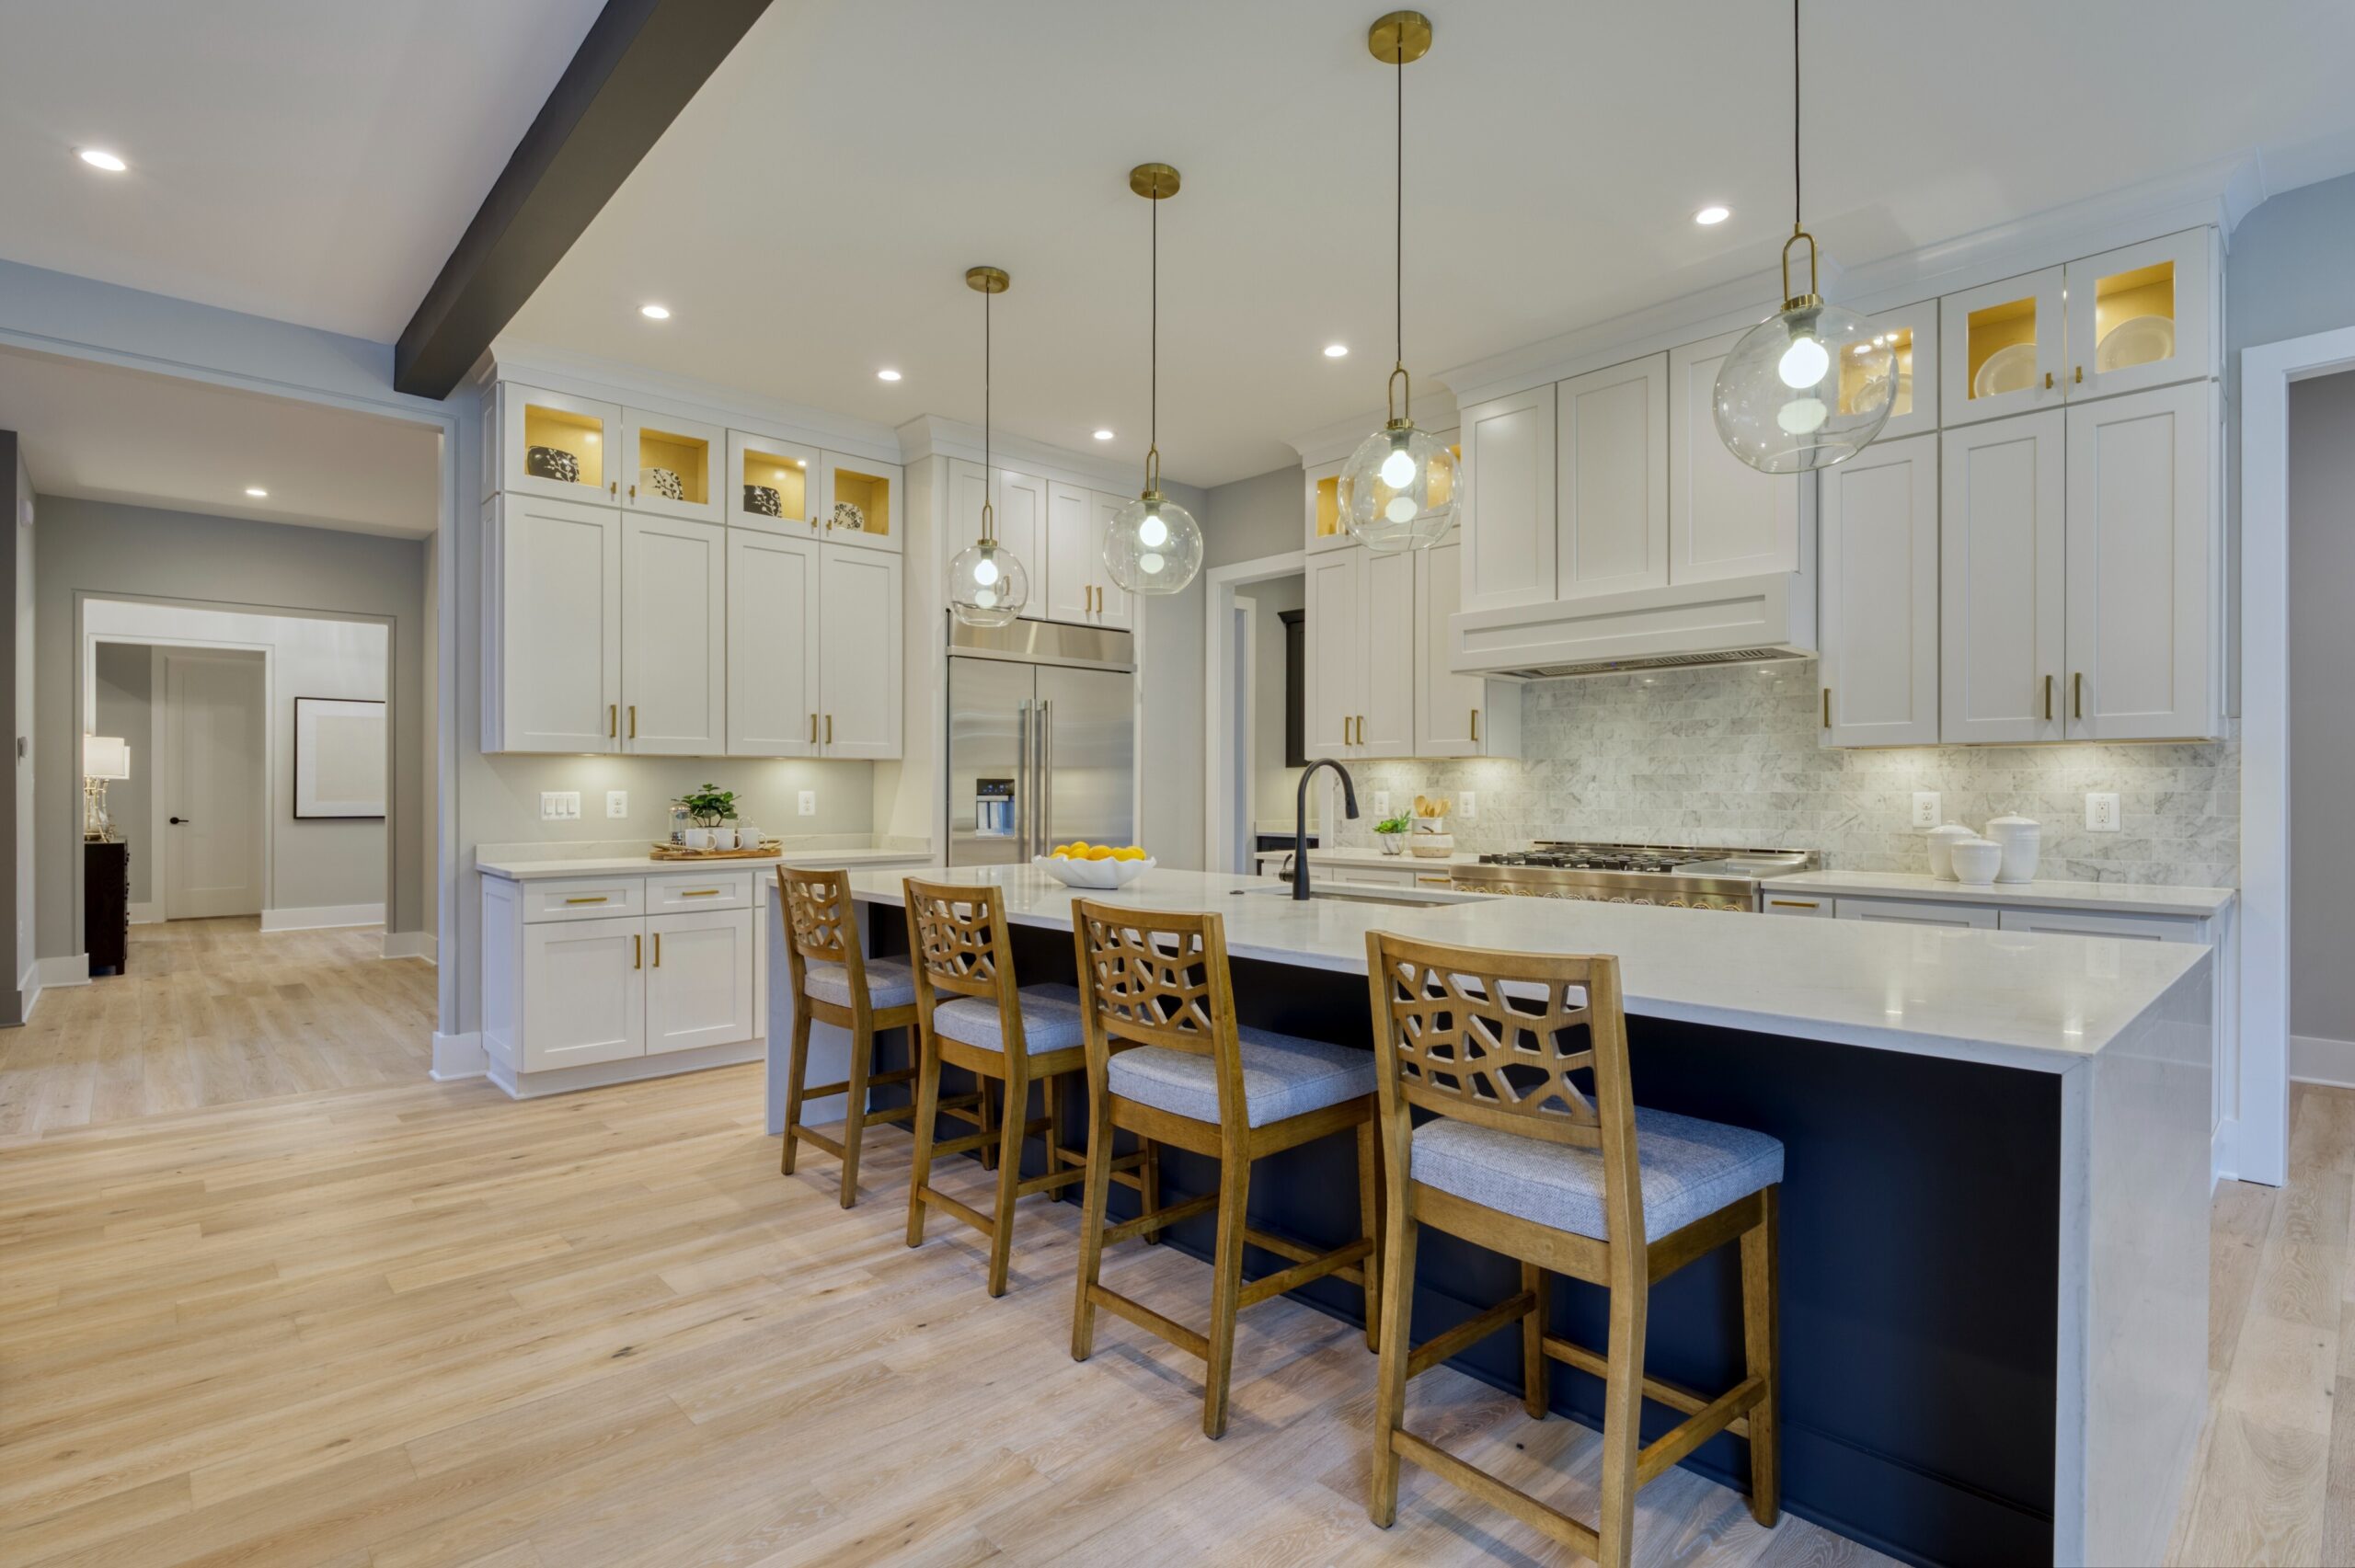 Professional interior photo of new construction home at 3400 N Ohio St - showing the white kitchen with black and gold accents. Large island and high end appliances